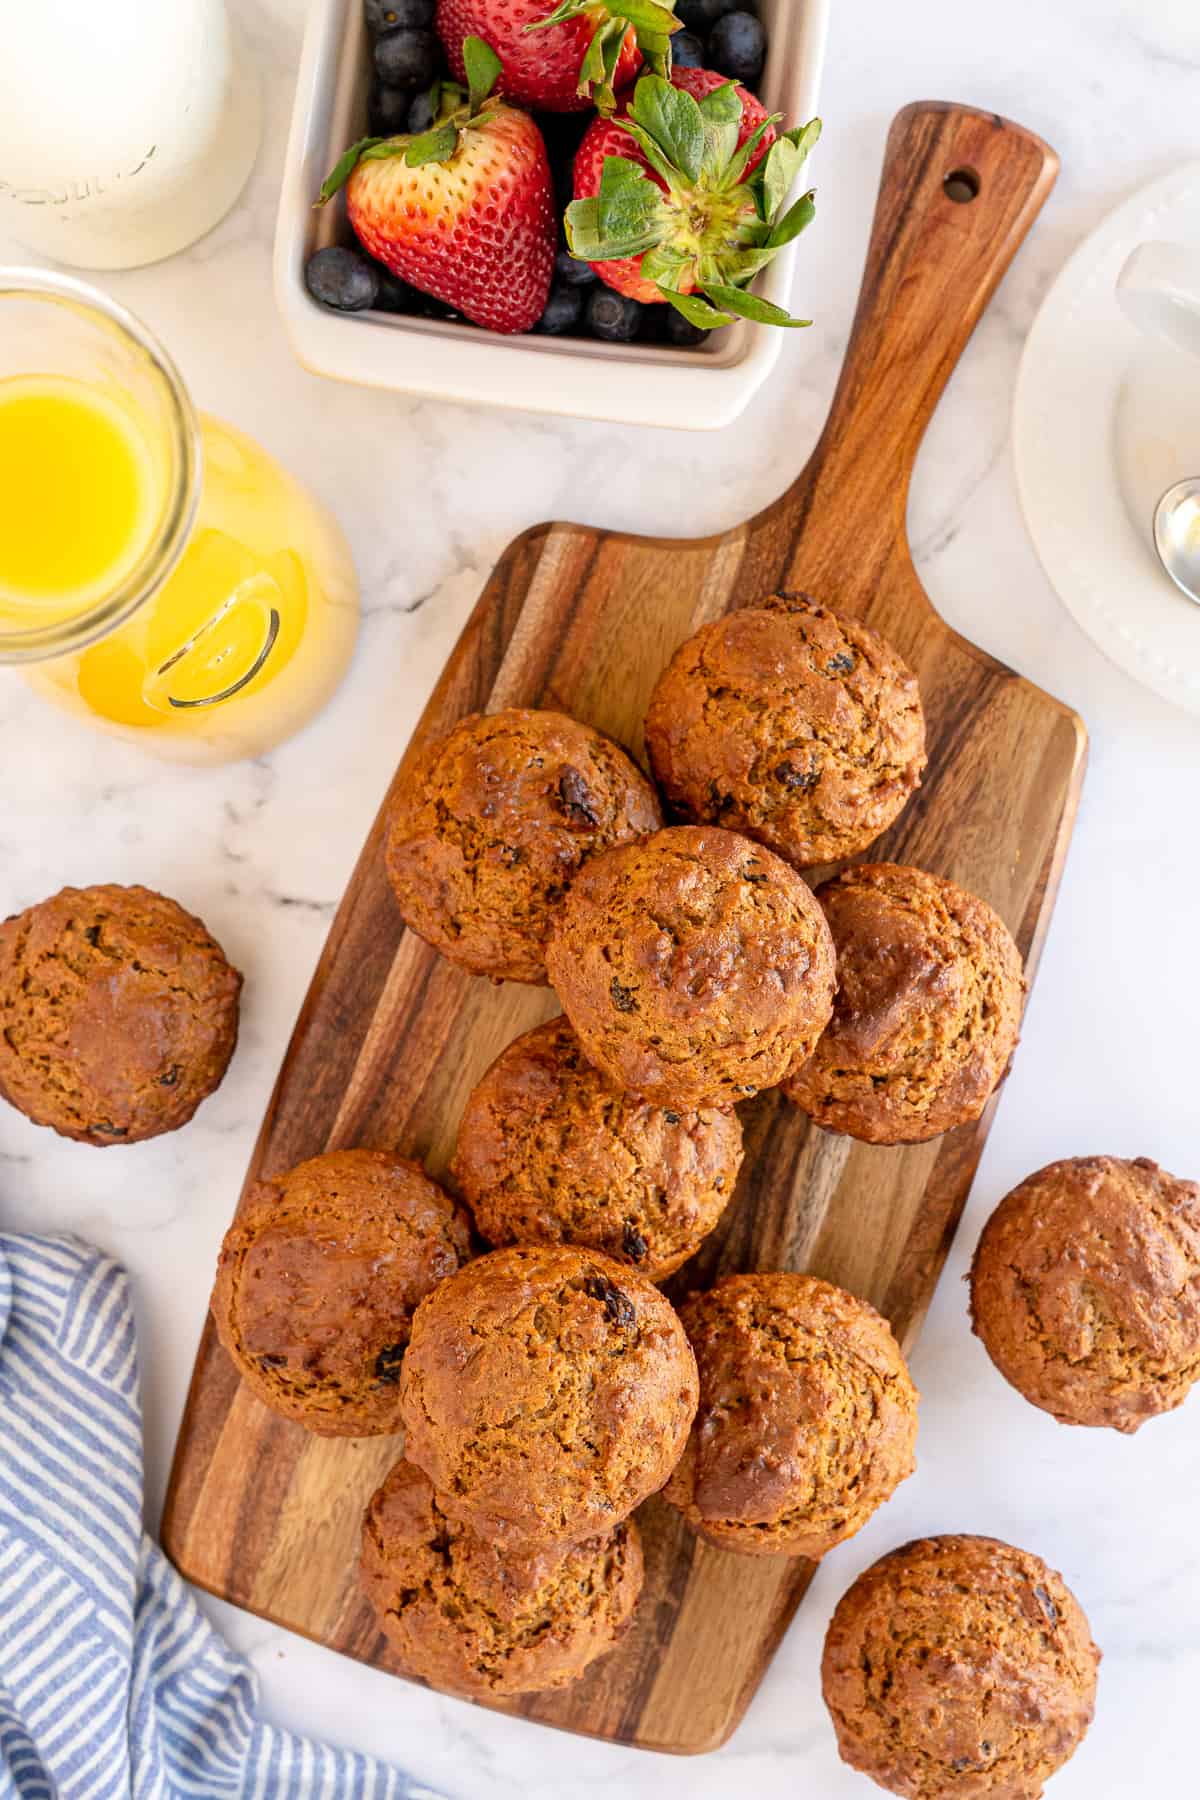 Bran muffins piled on to a cutting board and shot from over the top.